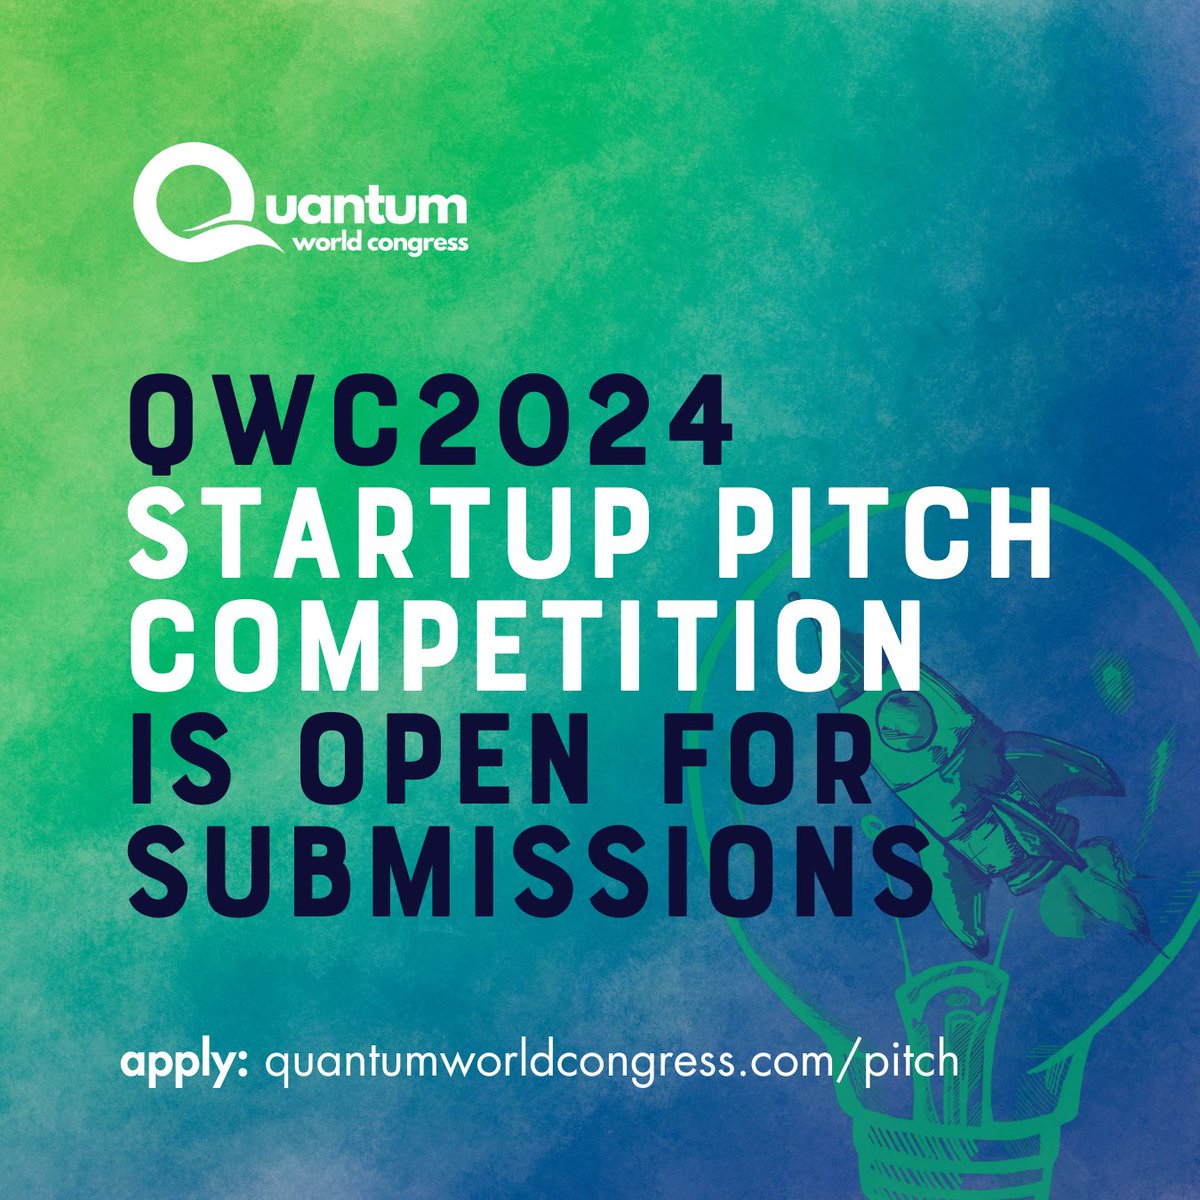 ❗The #QWC2024 Startup Pitch Competition is open for submissions! And here's everything you need to know to apply to this year's competition: quantumworldcongress.com/pitch

#QWC2024 #QuantumWorldCongress #Quantum #QuantumTech #QuantumConvergence #QuantumTechnology #QuantumAI